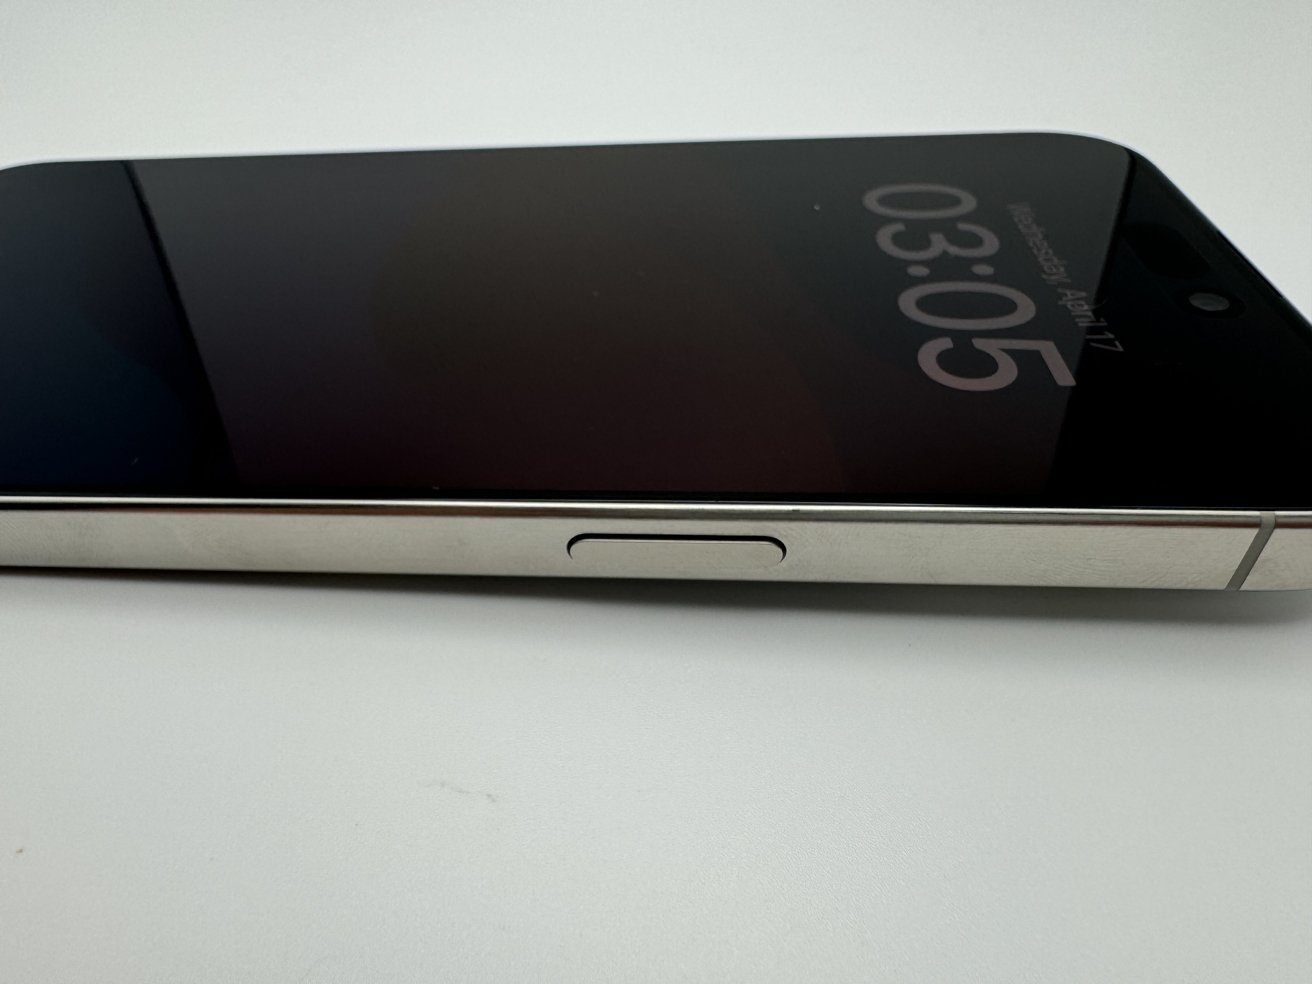 Smartphone lying flat on a white surface with screen showing the time 03:05.